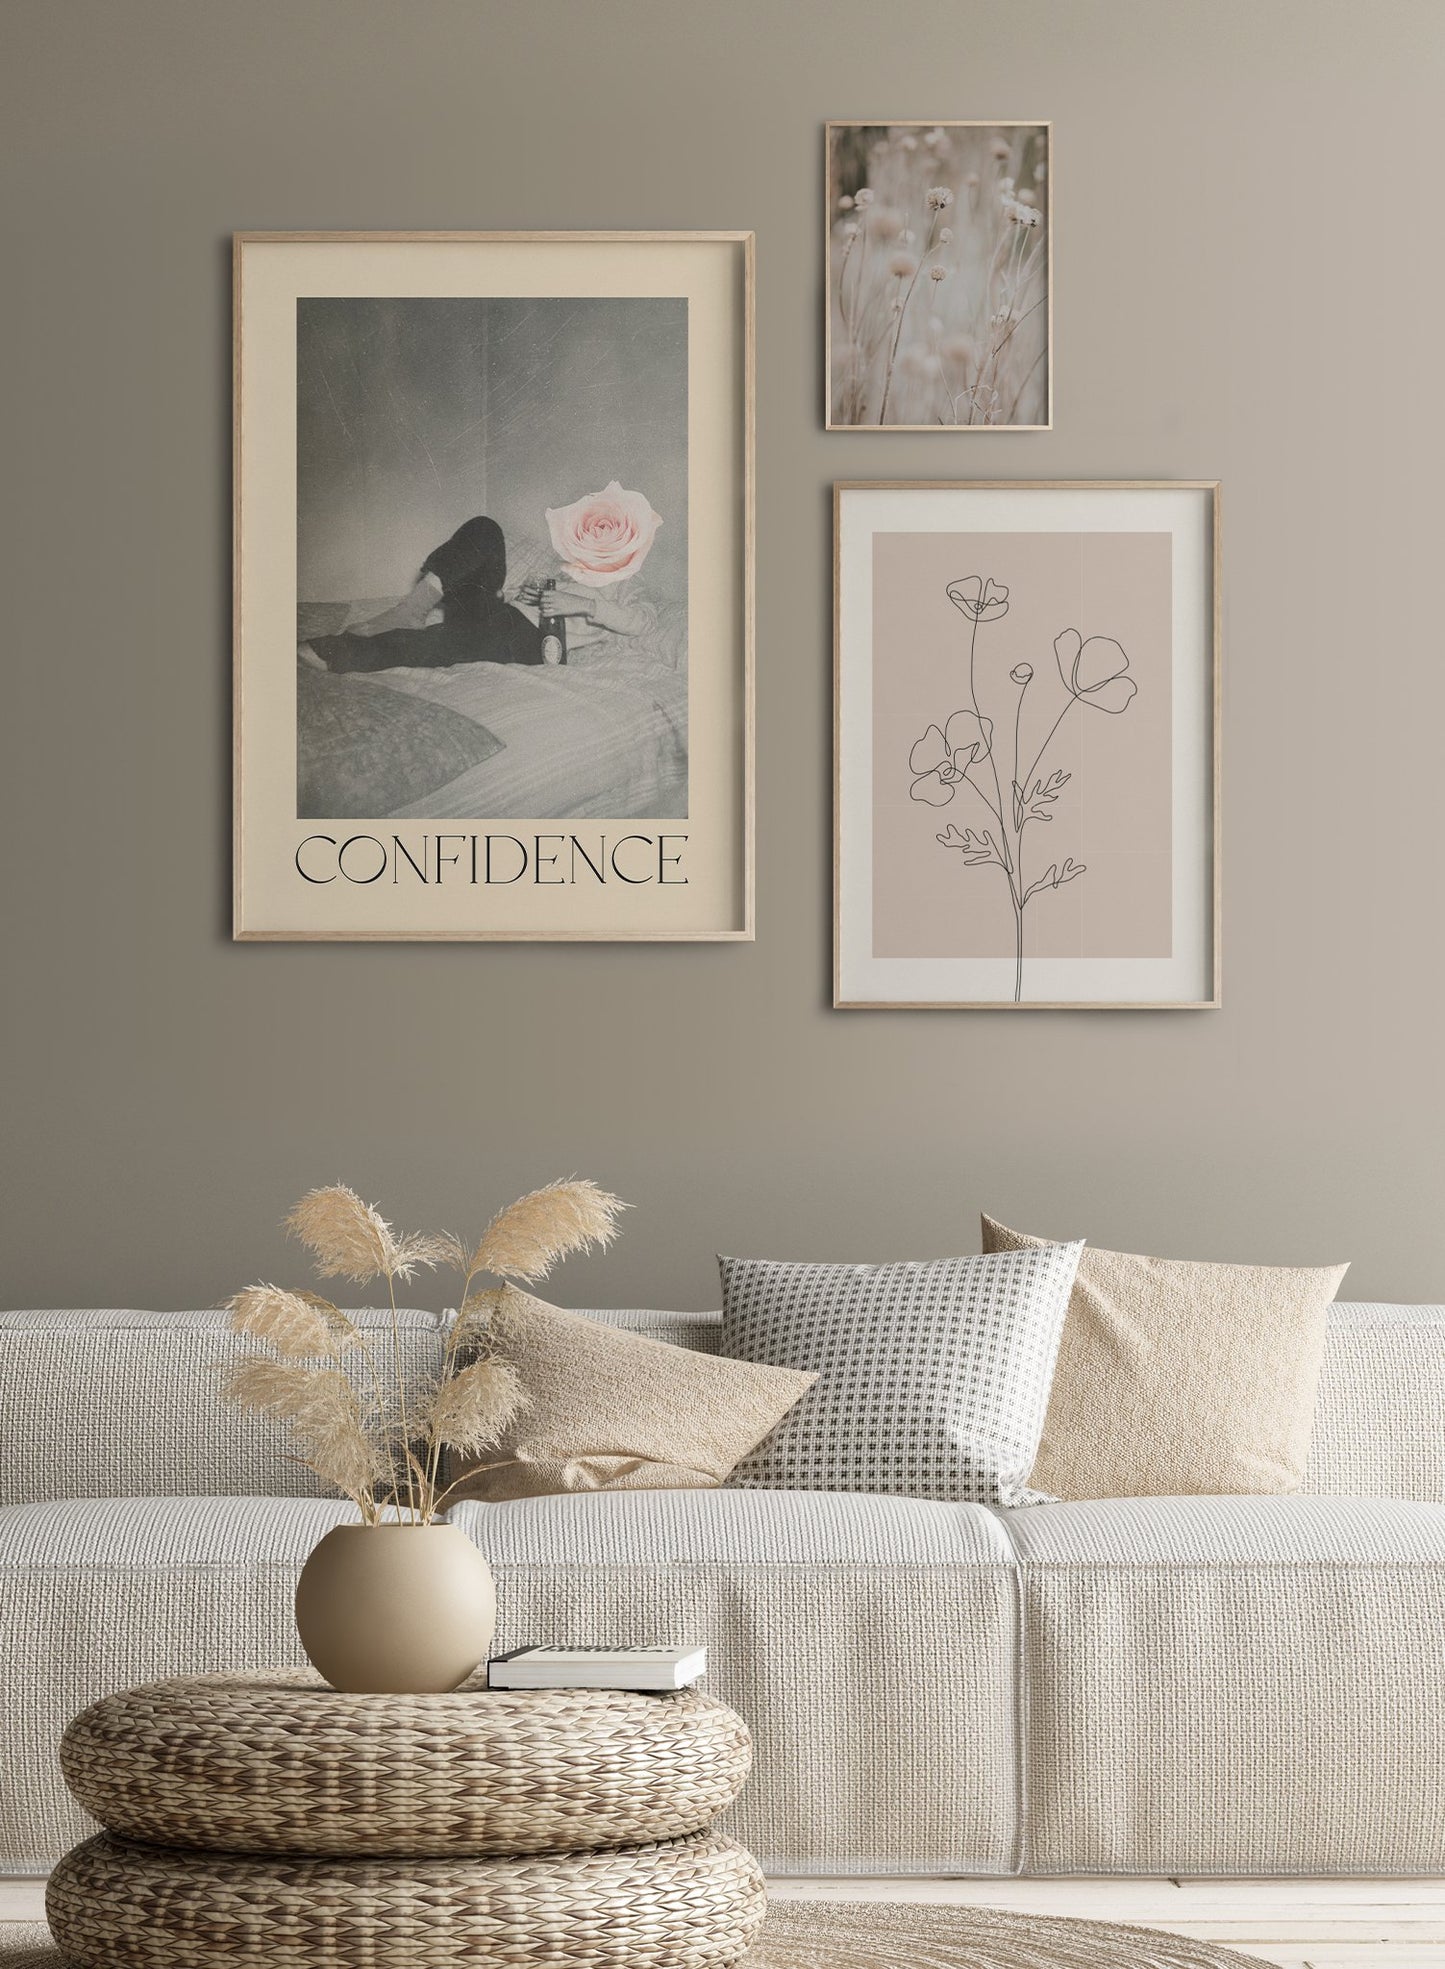 "Confidence" is a minimalist beige and black & white typography collage poster by Opposite Wall of a cutout vintage man lying in bed with wine and a pink rose and the word ‘confidence’ in vintage letters.